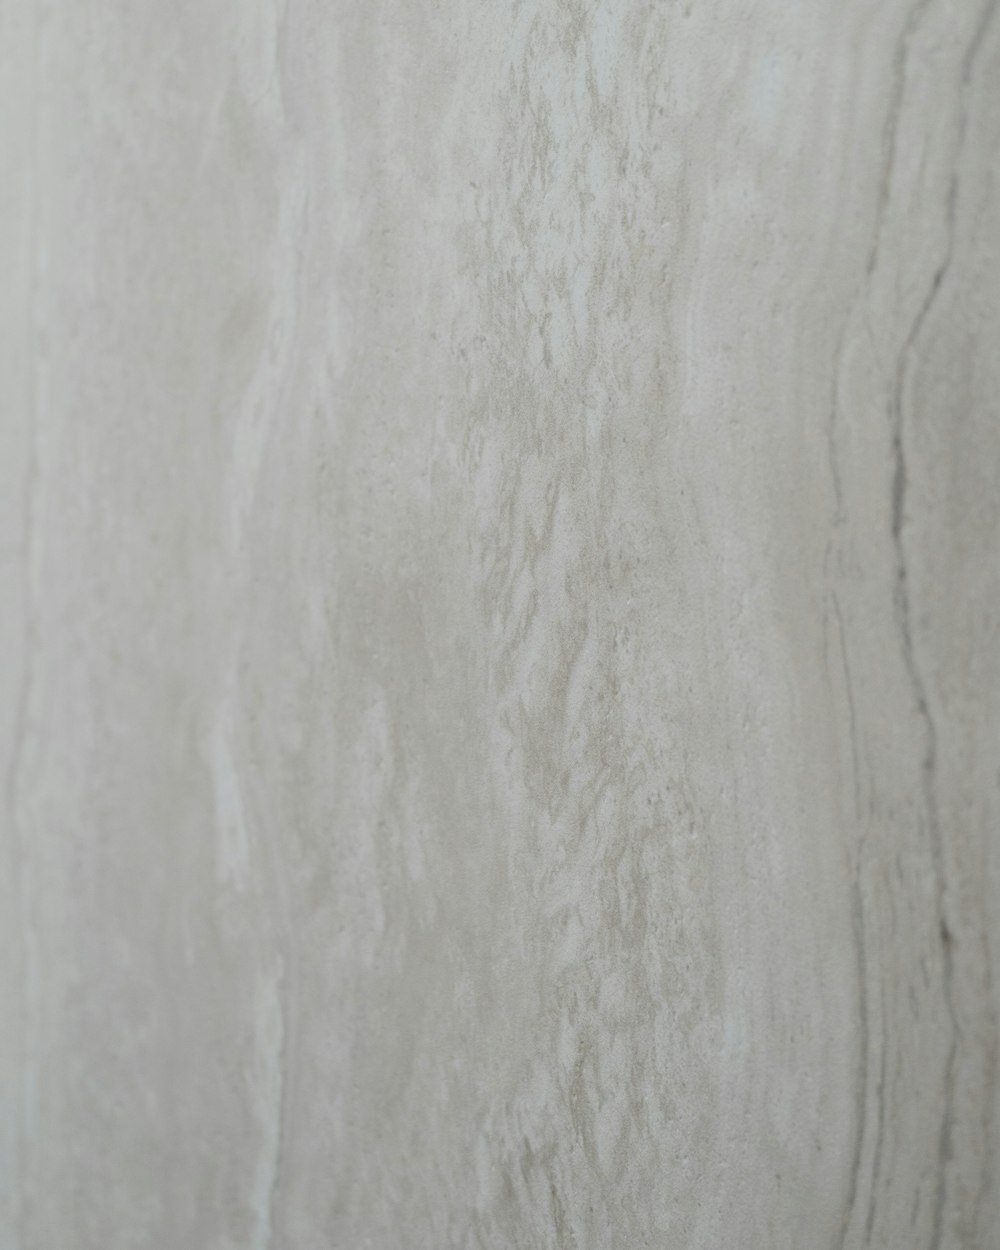 a close up of a white marble wall